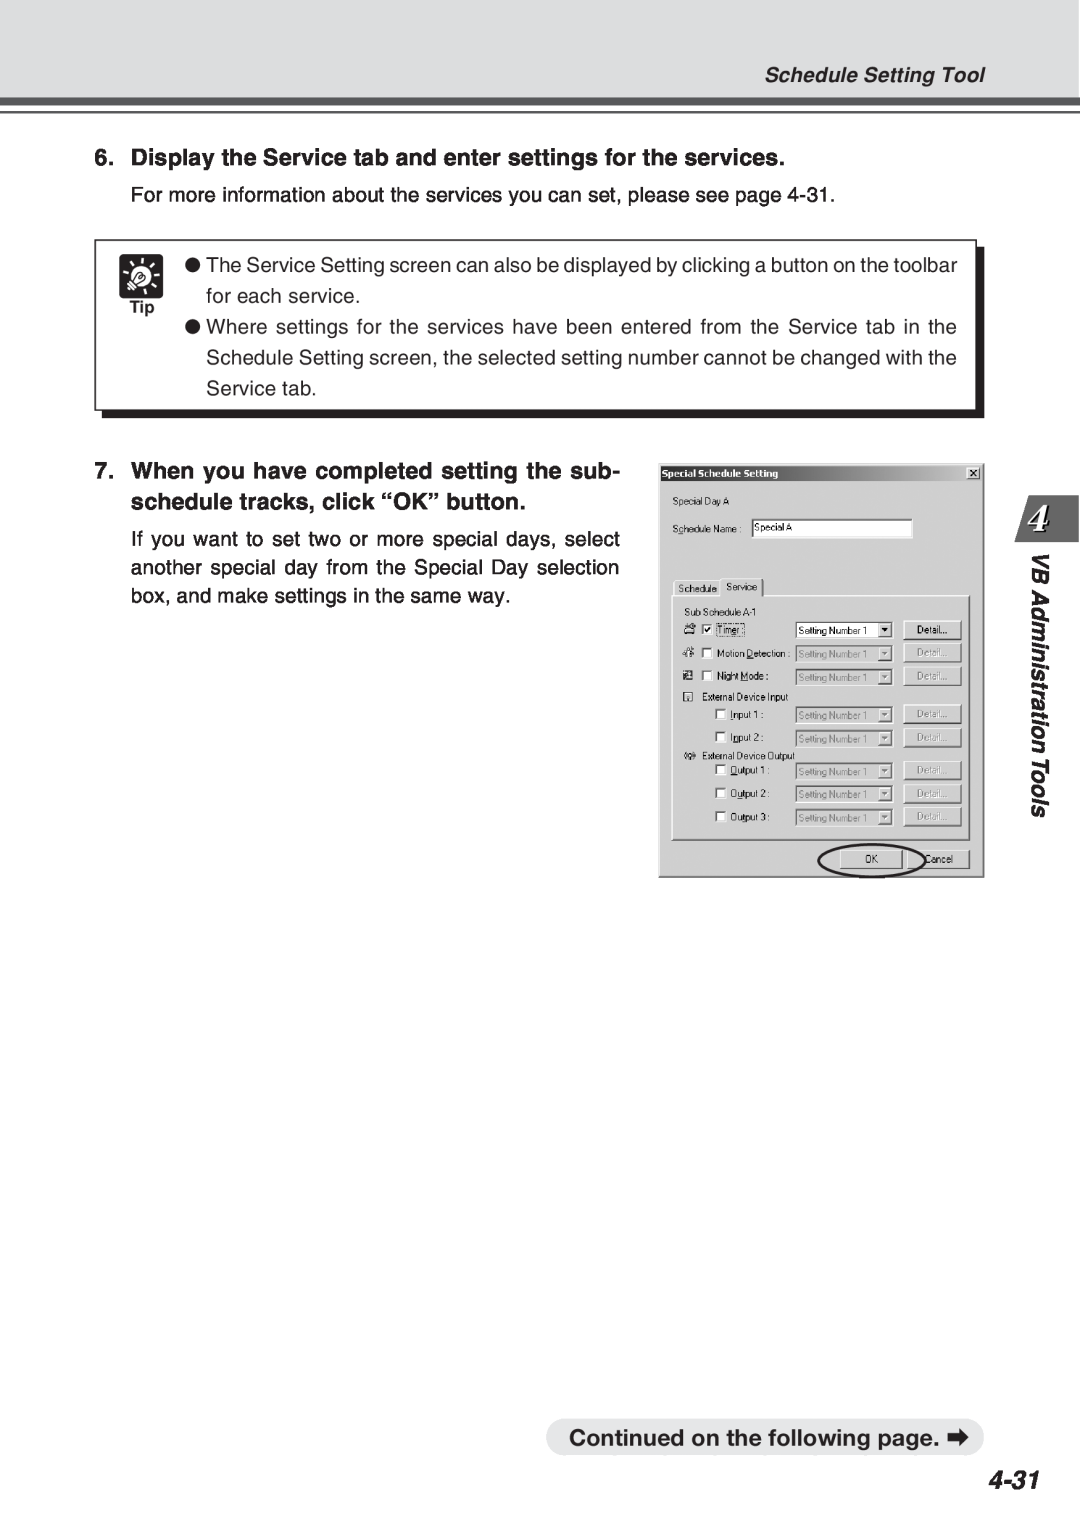 Canon Vb-C50fi user manual 4-31, Continued on the following page. a, VB Administration Tools 